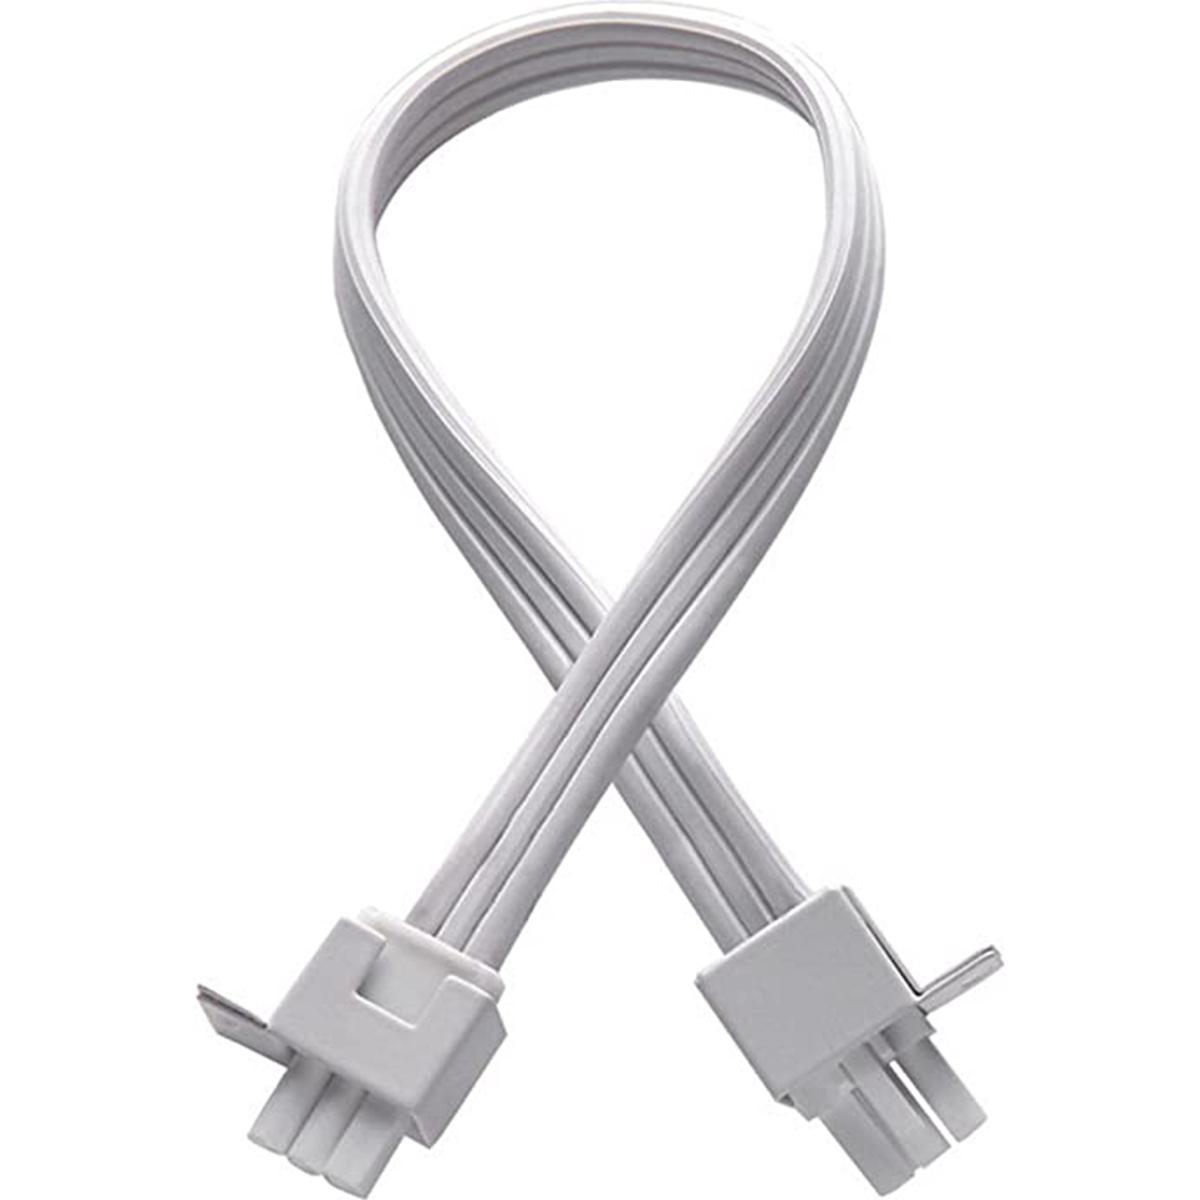 36in. Interconnect Cable For Undercabinet Lights, White Finish